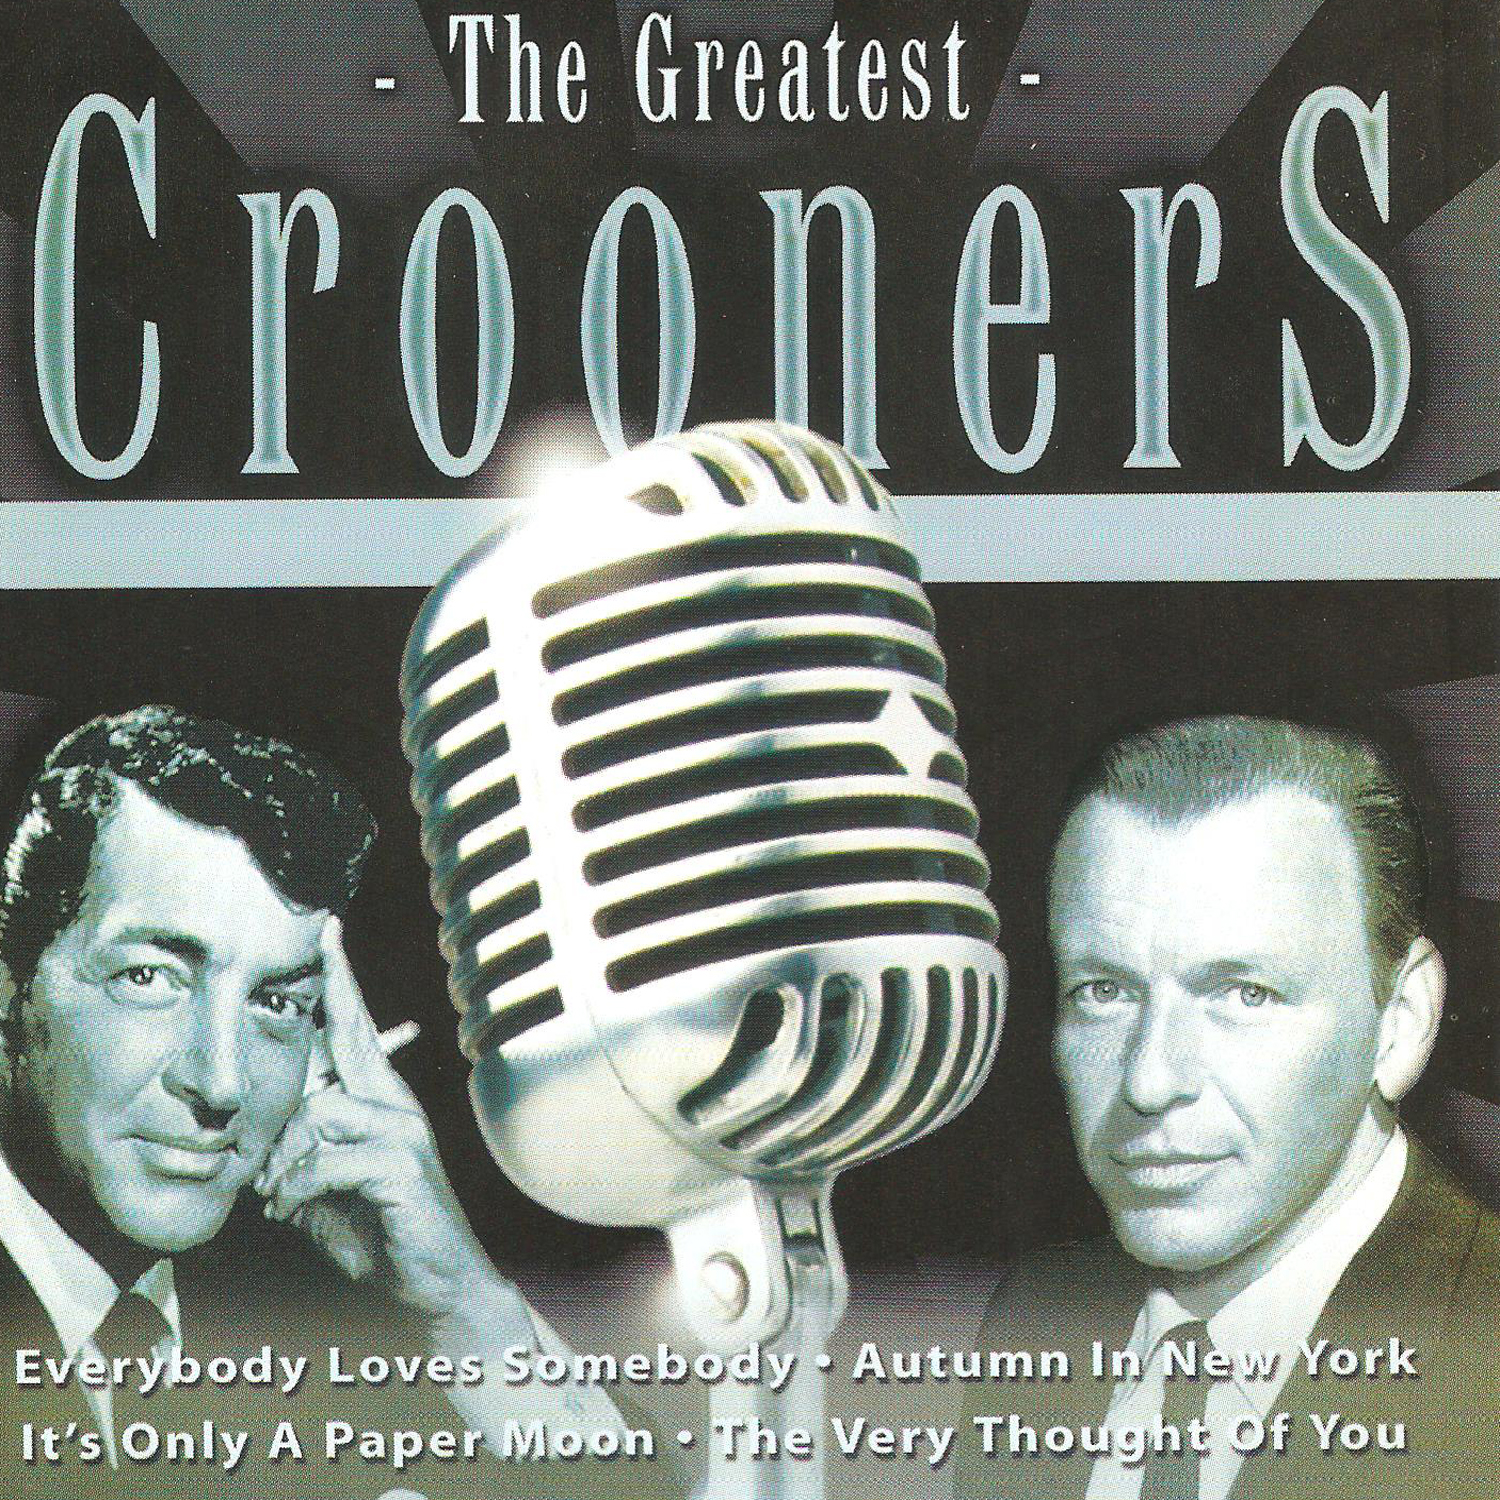 The Greatest Crooners